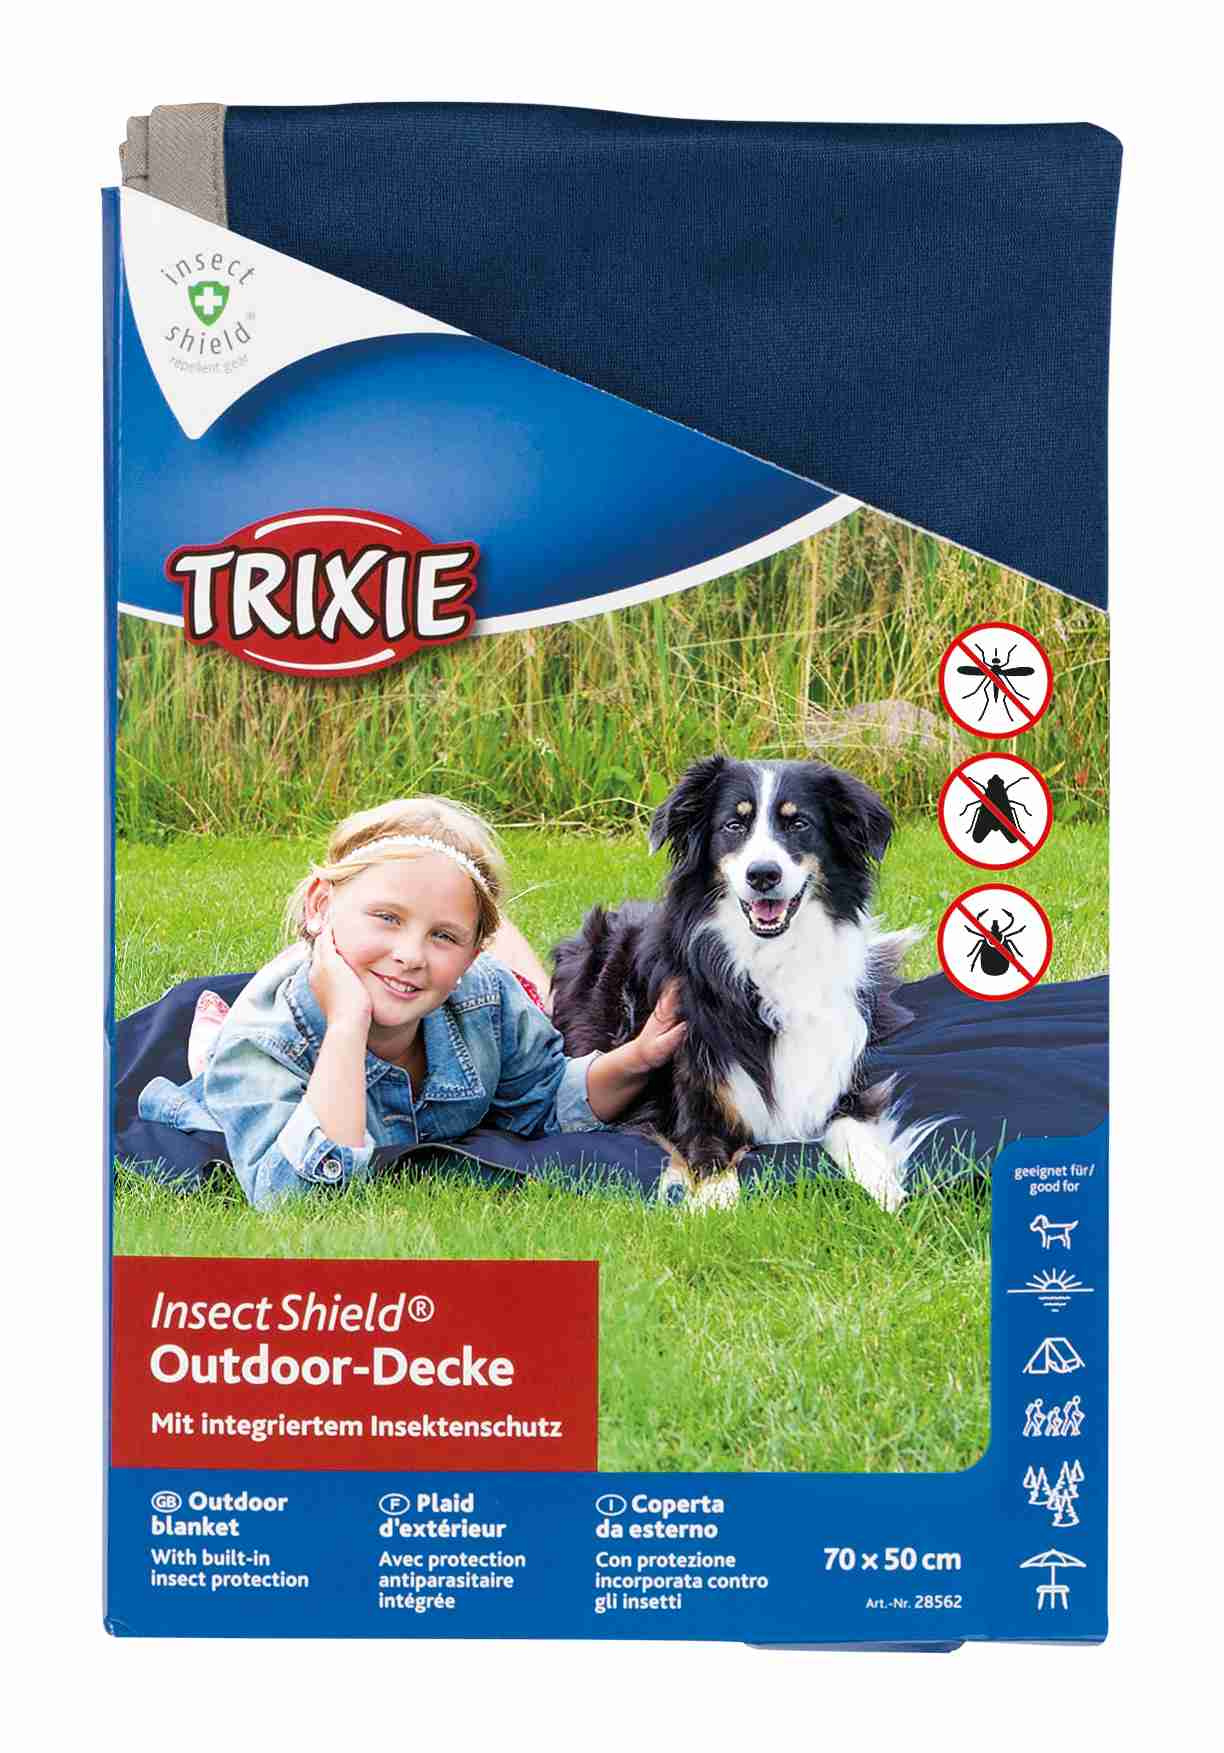 Insect Shield Outdoor-Decke